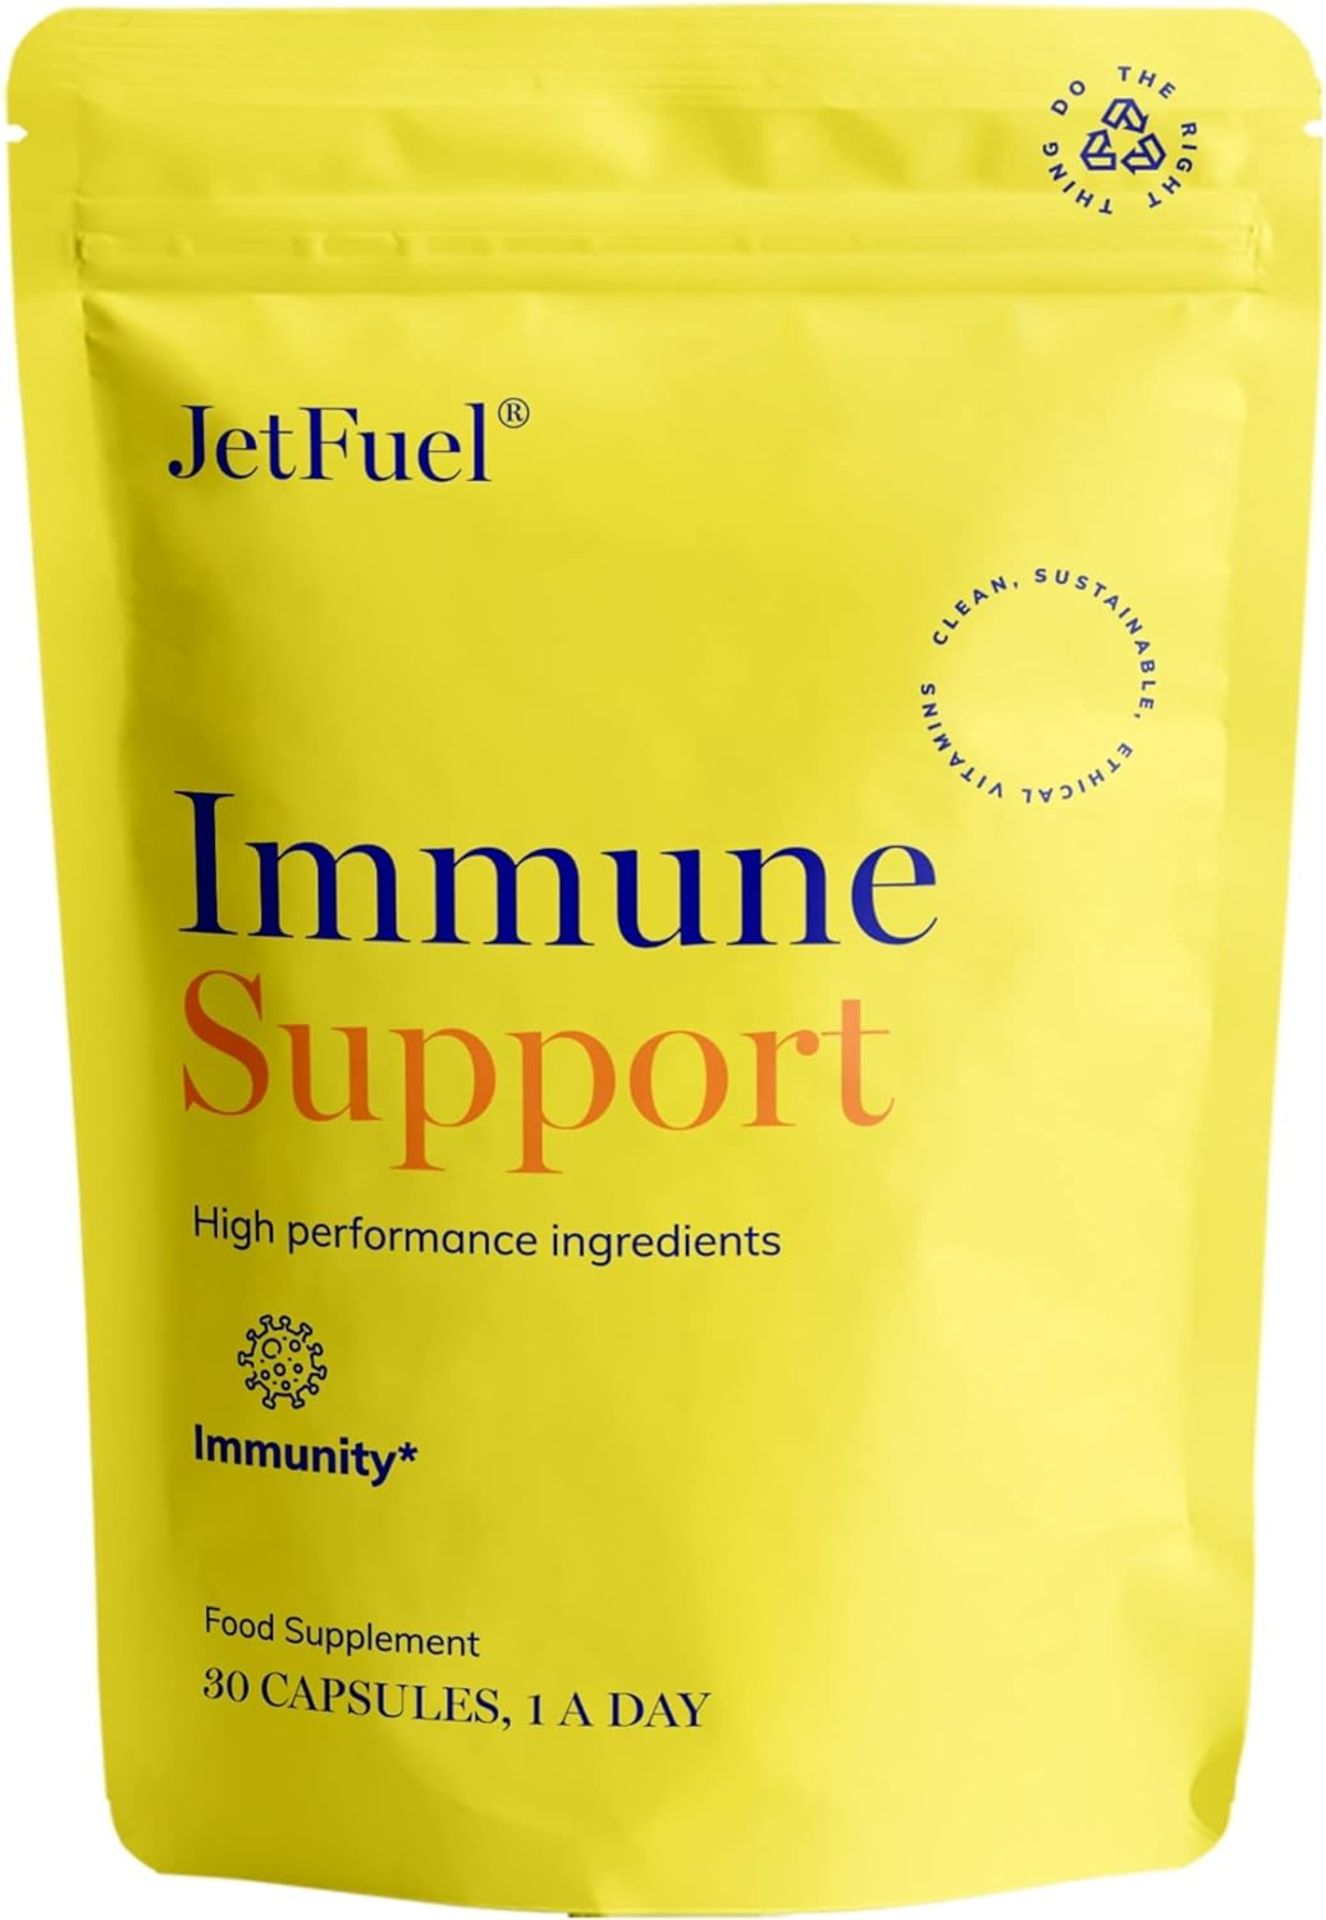 50x PACKS OF 30 JETFUEL IMMUNE SUPPORT VITAMIN CAPSULES. (OFC). Multivitamins Minerals and